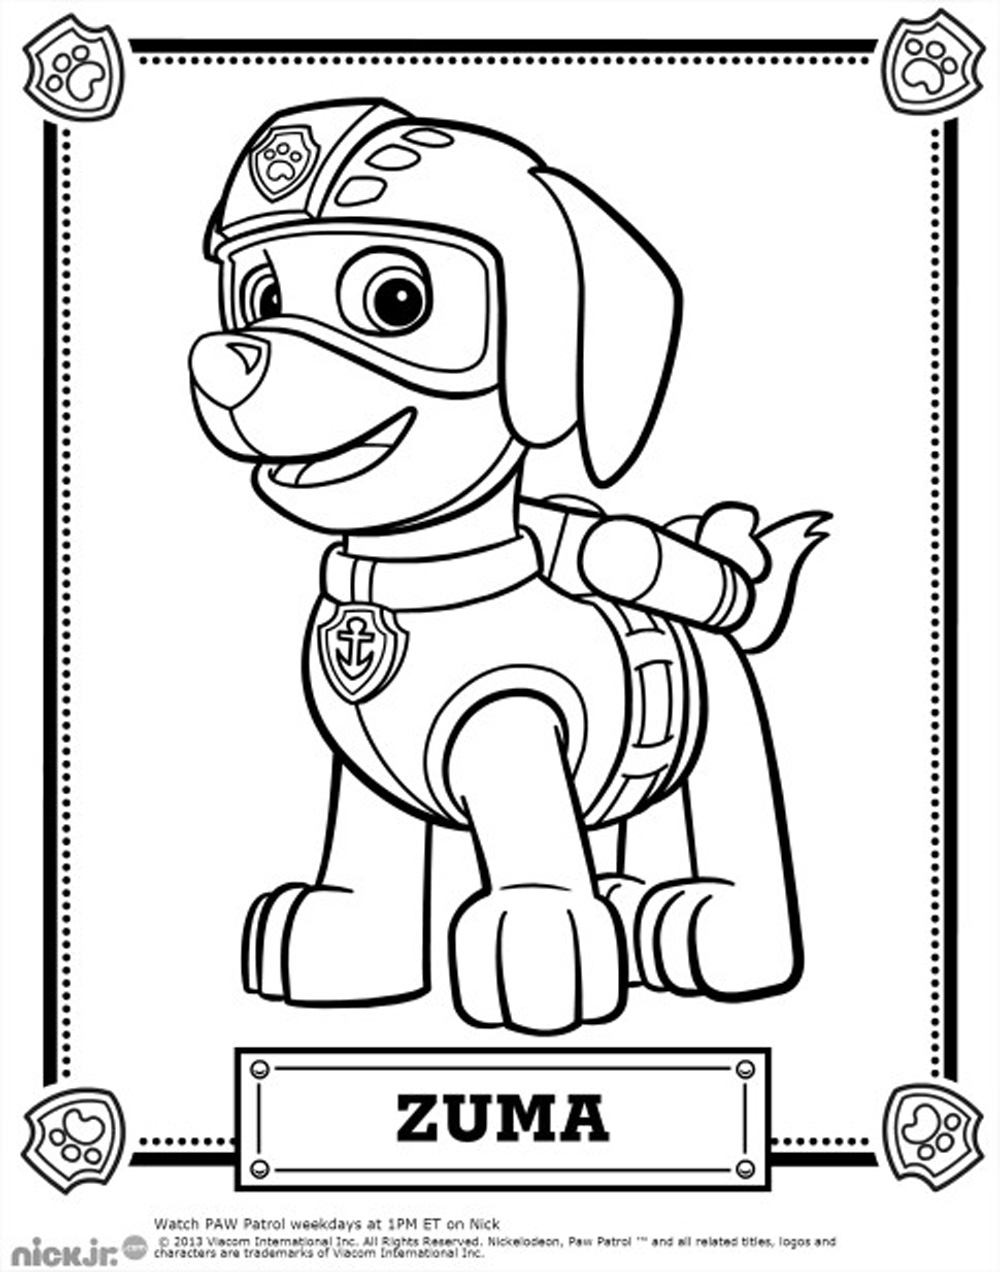 Paw Patrol coloring page with few details for kids